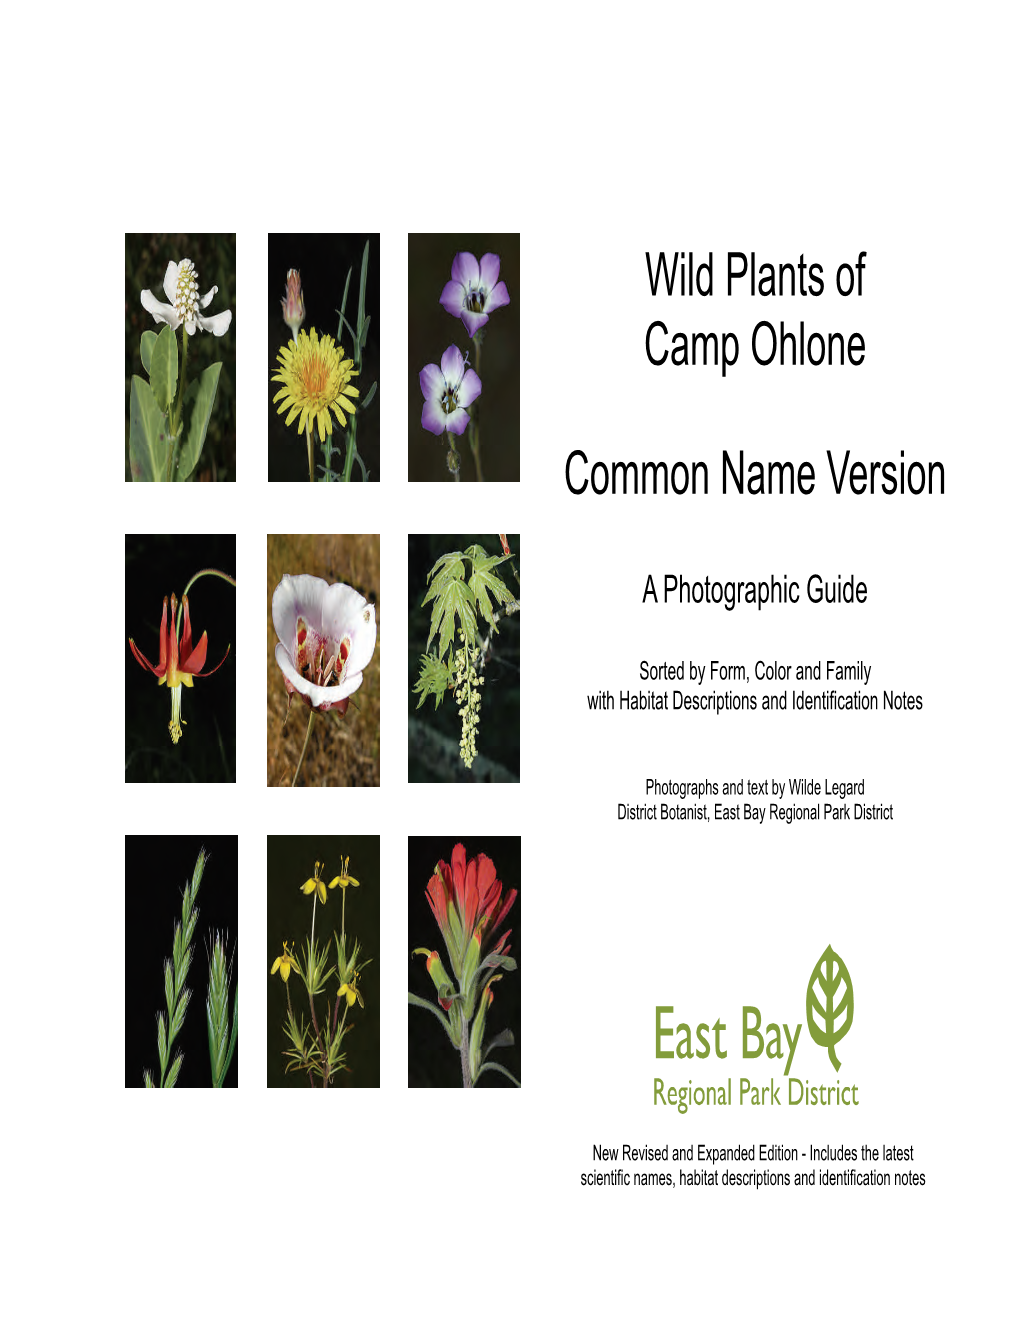 Wild Plants of Camp Ohlone Common Name Version